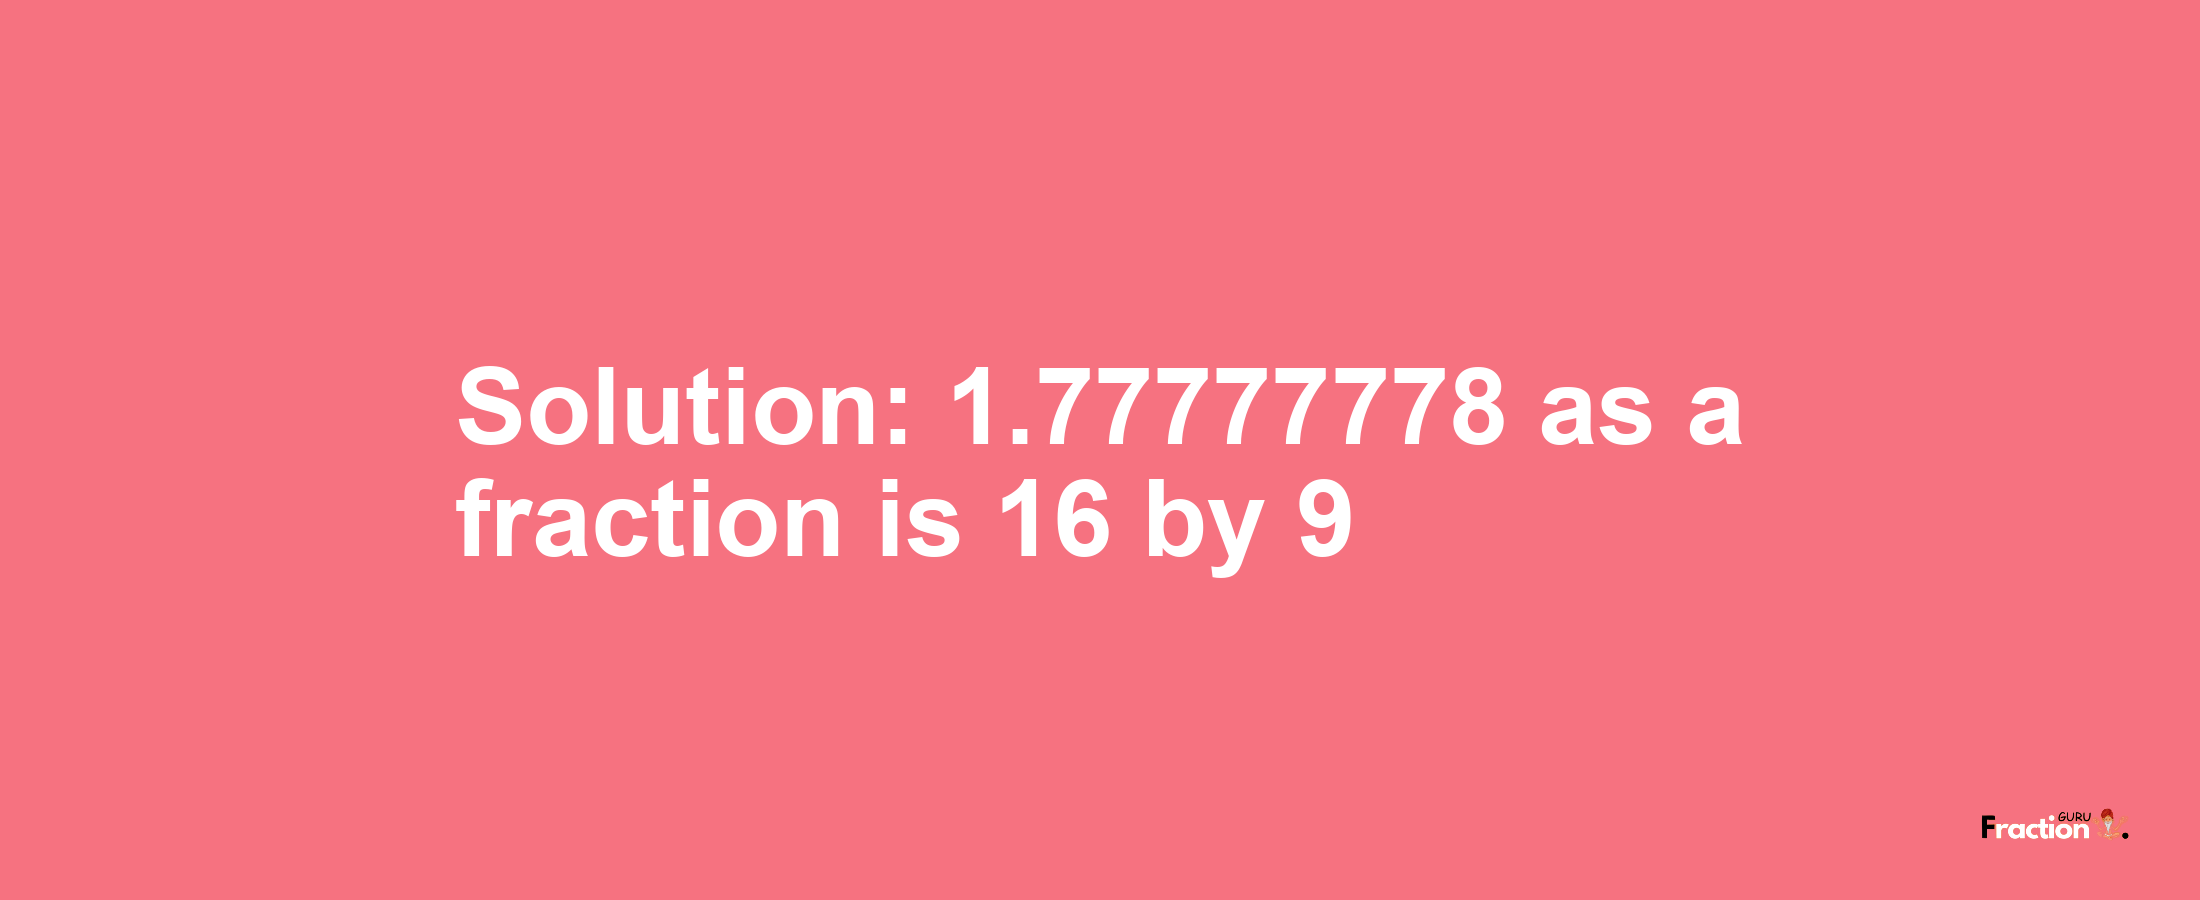 Solution:1.77777778 as a fraction is 16/9